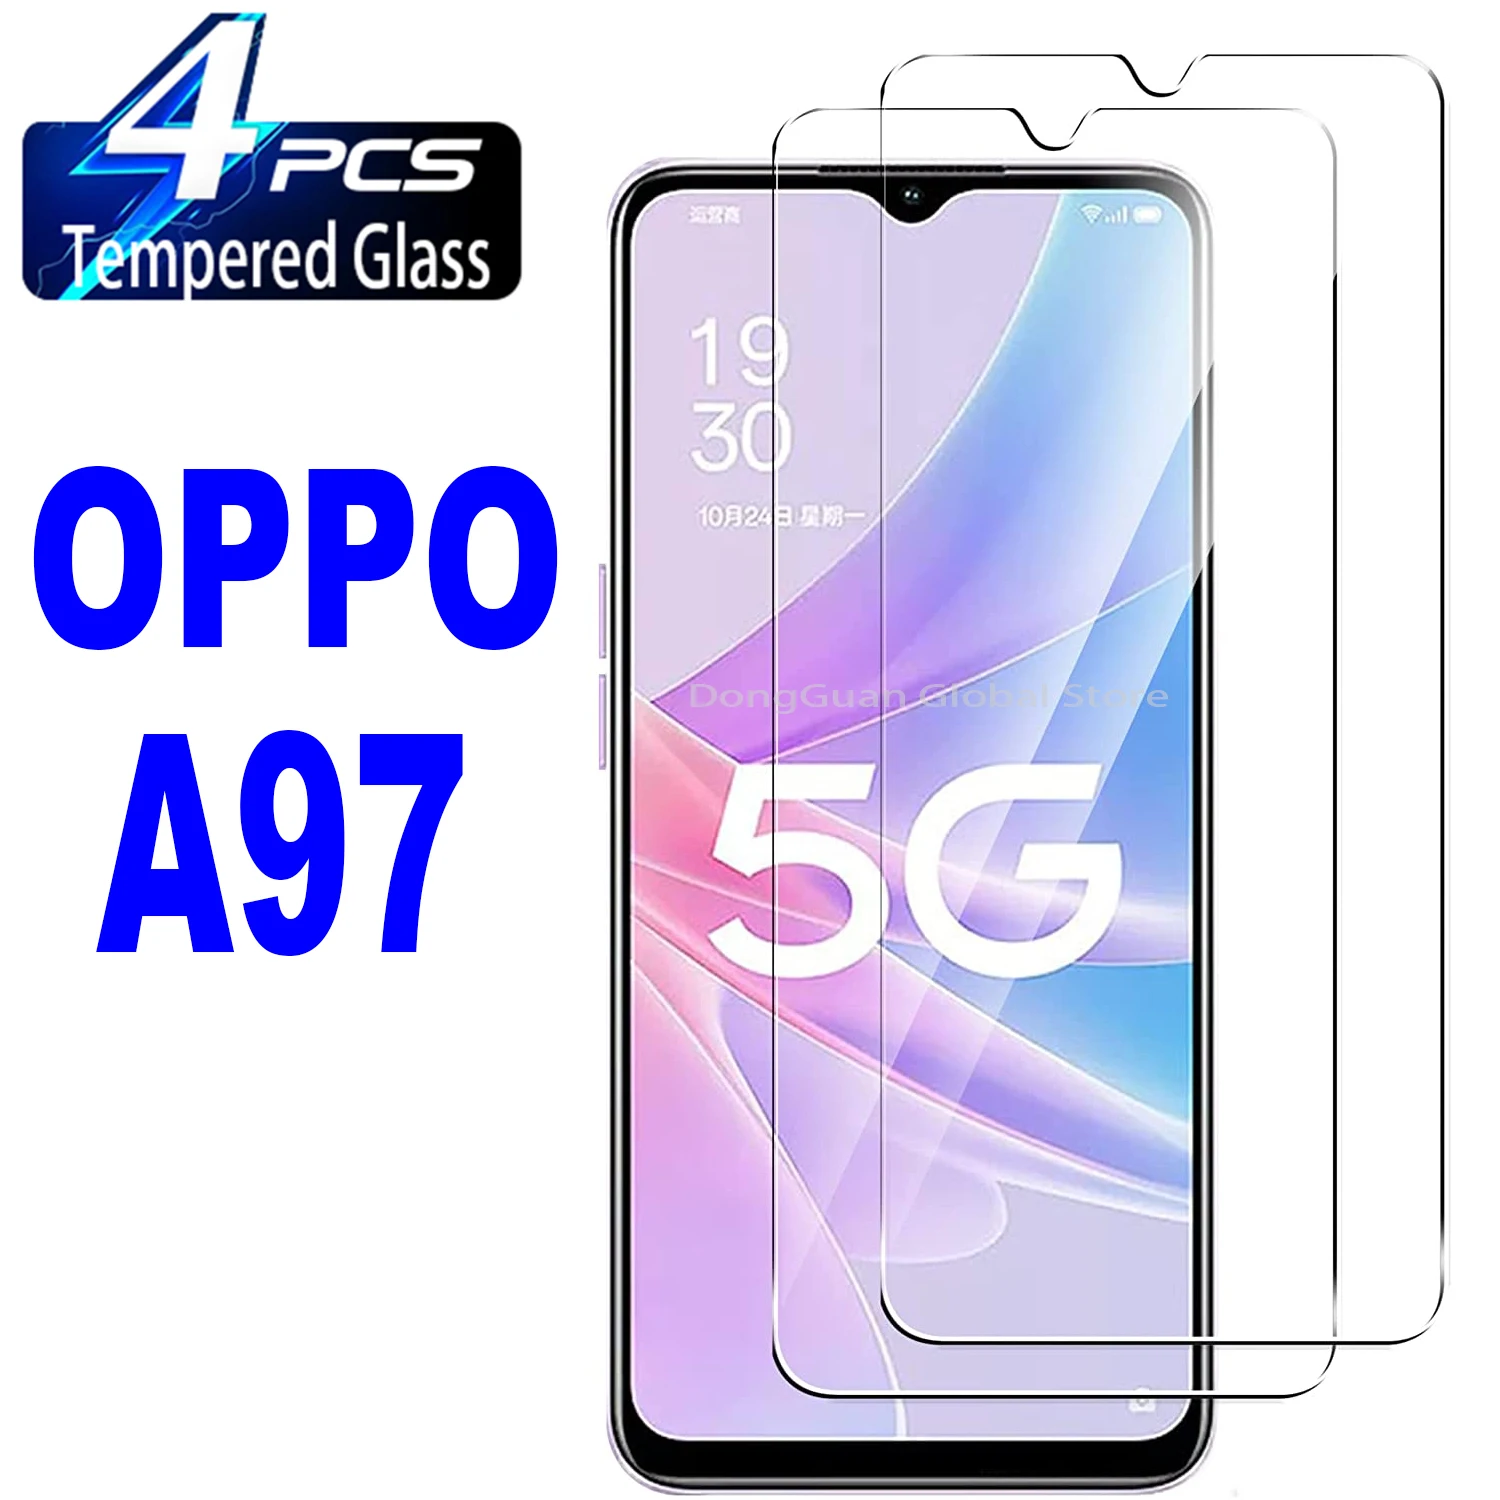 2/4Pcs Tempered Glass For OPPO A97 Screen Protector Glass Film 2 4pcs screen protector glass for oppo a78 tempered glass film